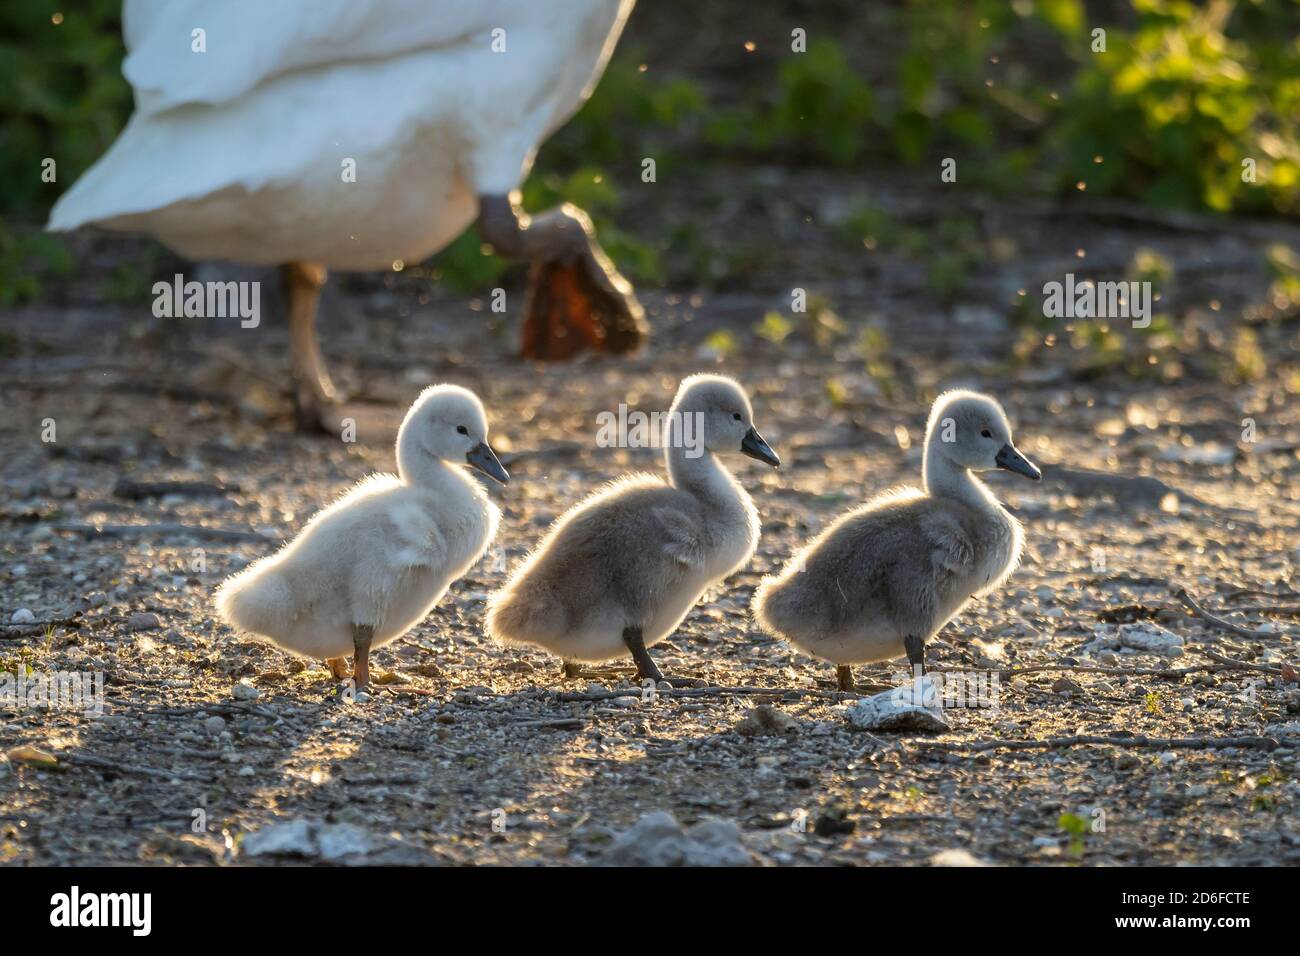 Mute swan (Cygnus olor) with chicks, Germany, Europe Stock Photo